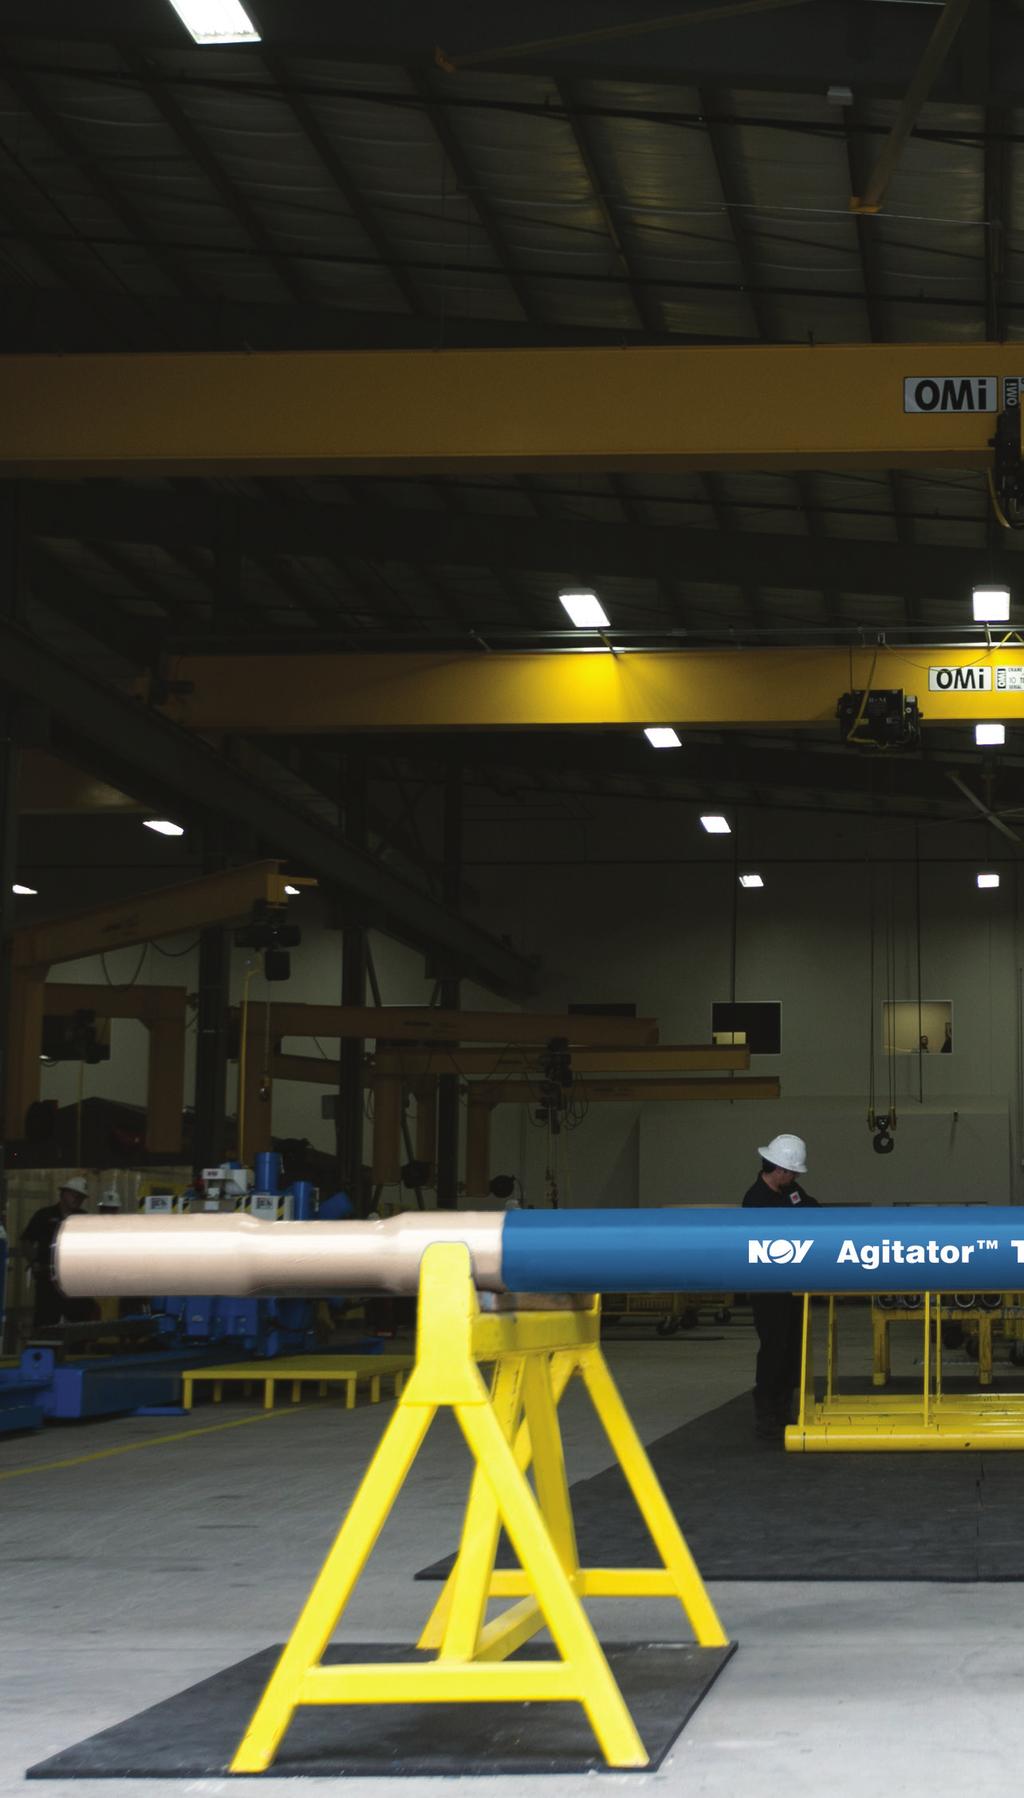 NOV is the largest independent downhole tool and equipment provider in the world.